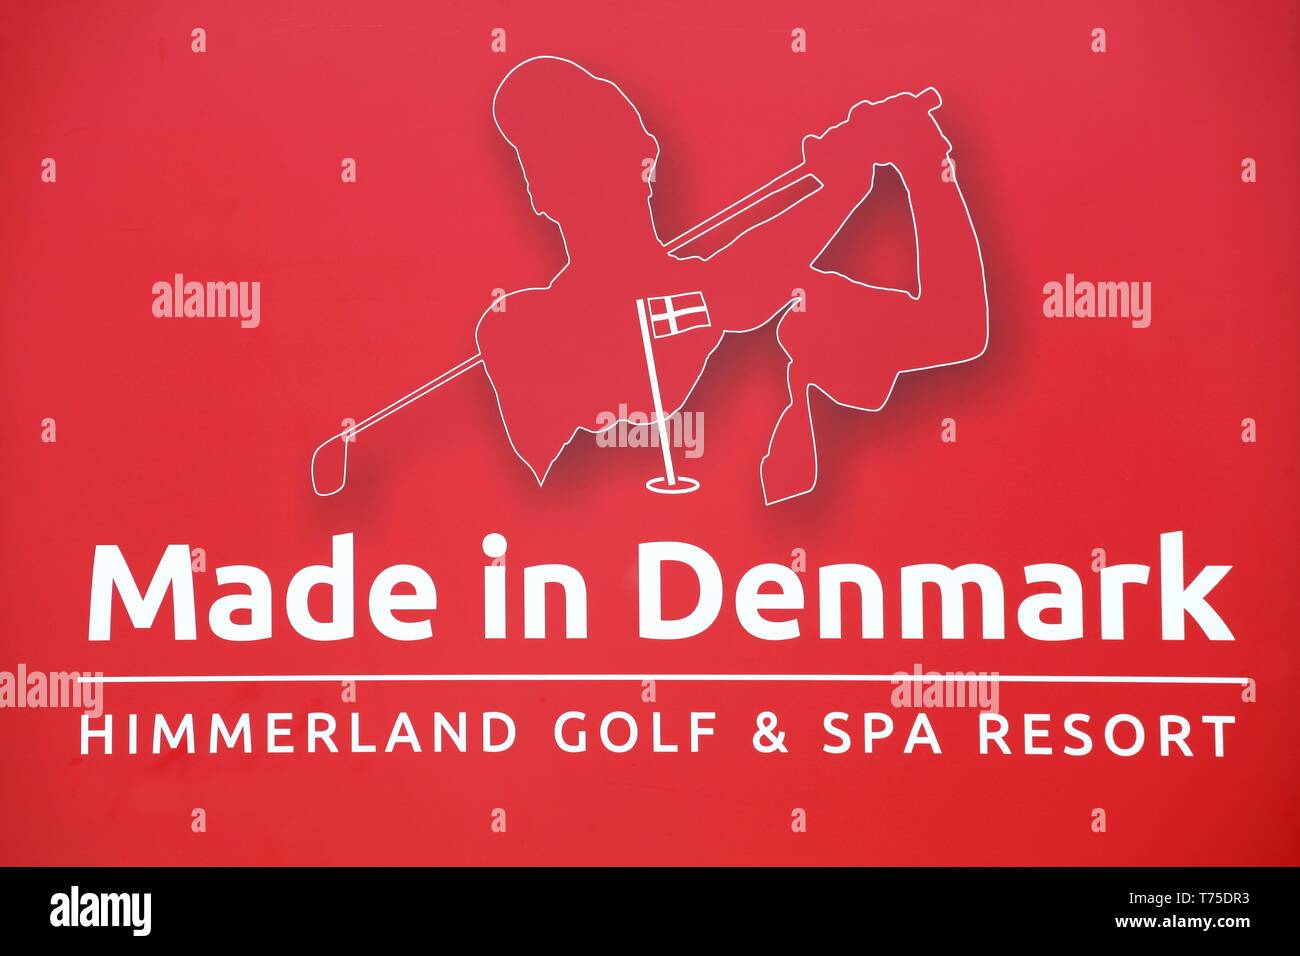 Himmerland, Denmark - August 23, 2017: Made in Denmark sign on a panel. Made in Denmark is a European Tour golf tournament played annually in Denmark Stock Photo